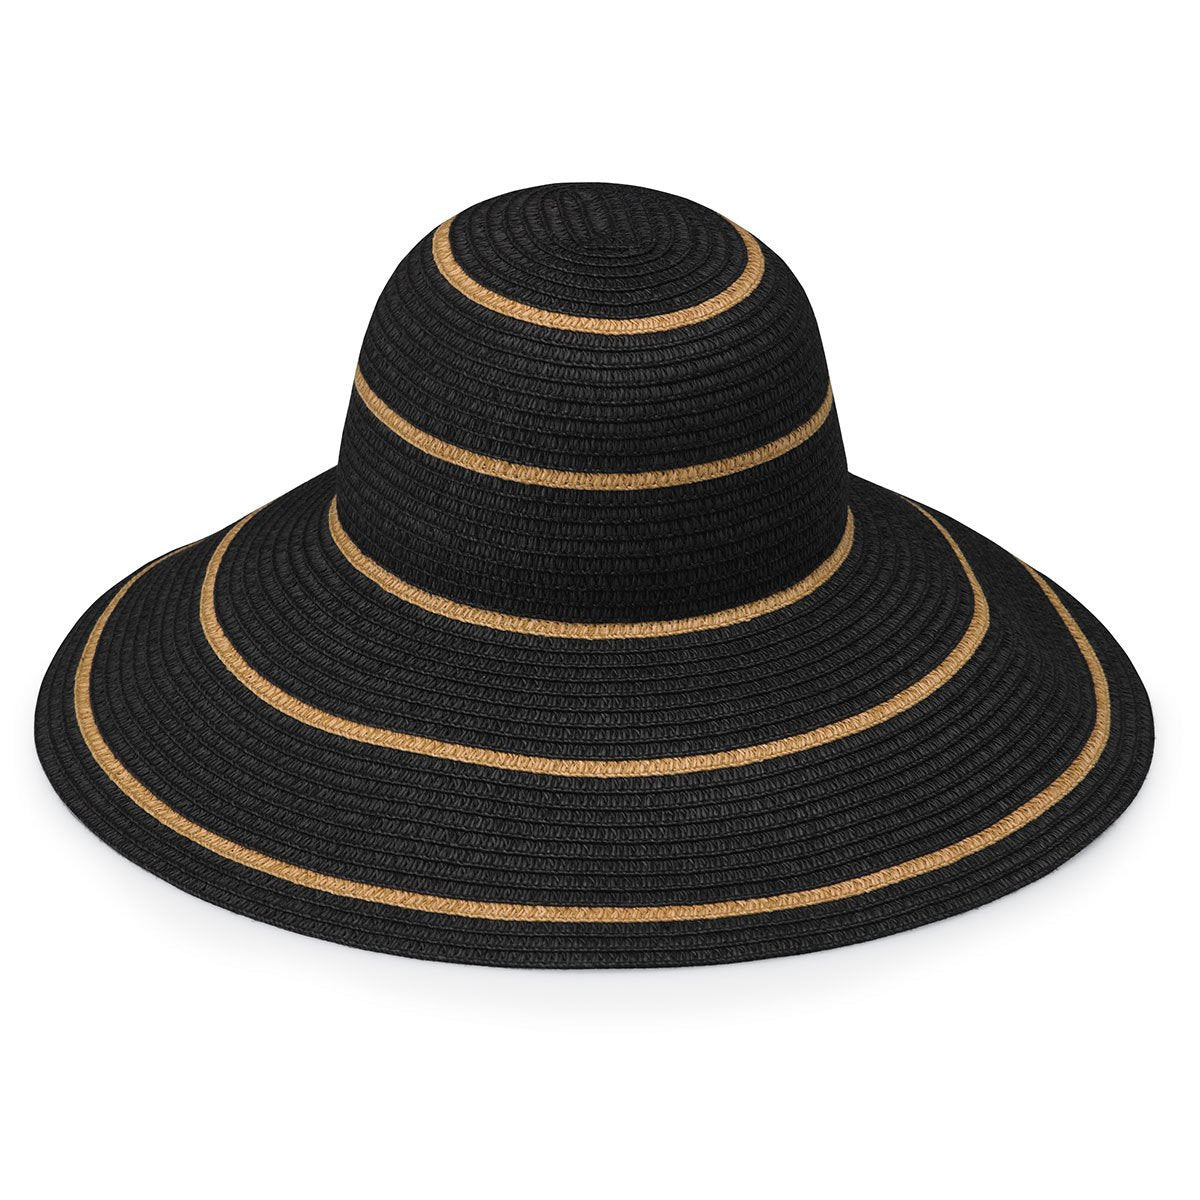 Featuring Front of Women's Packable Wide Brim Crown Style Savannah UPF Sun Hat in Black Camel from Wallaroo